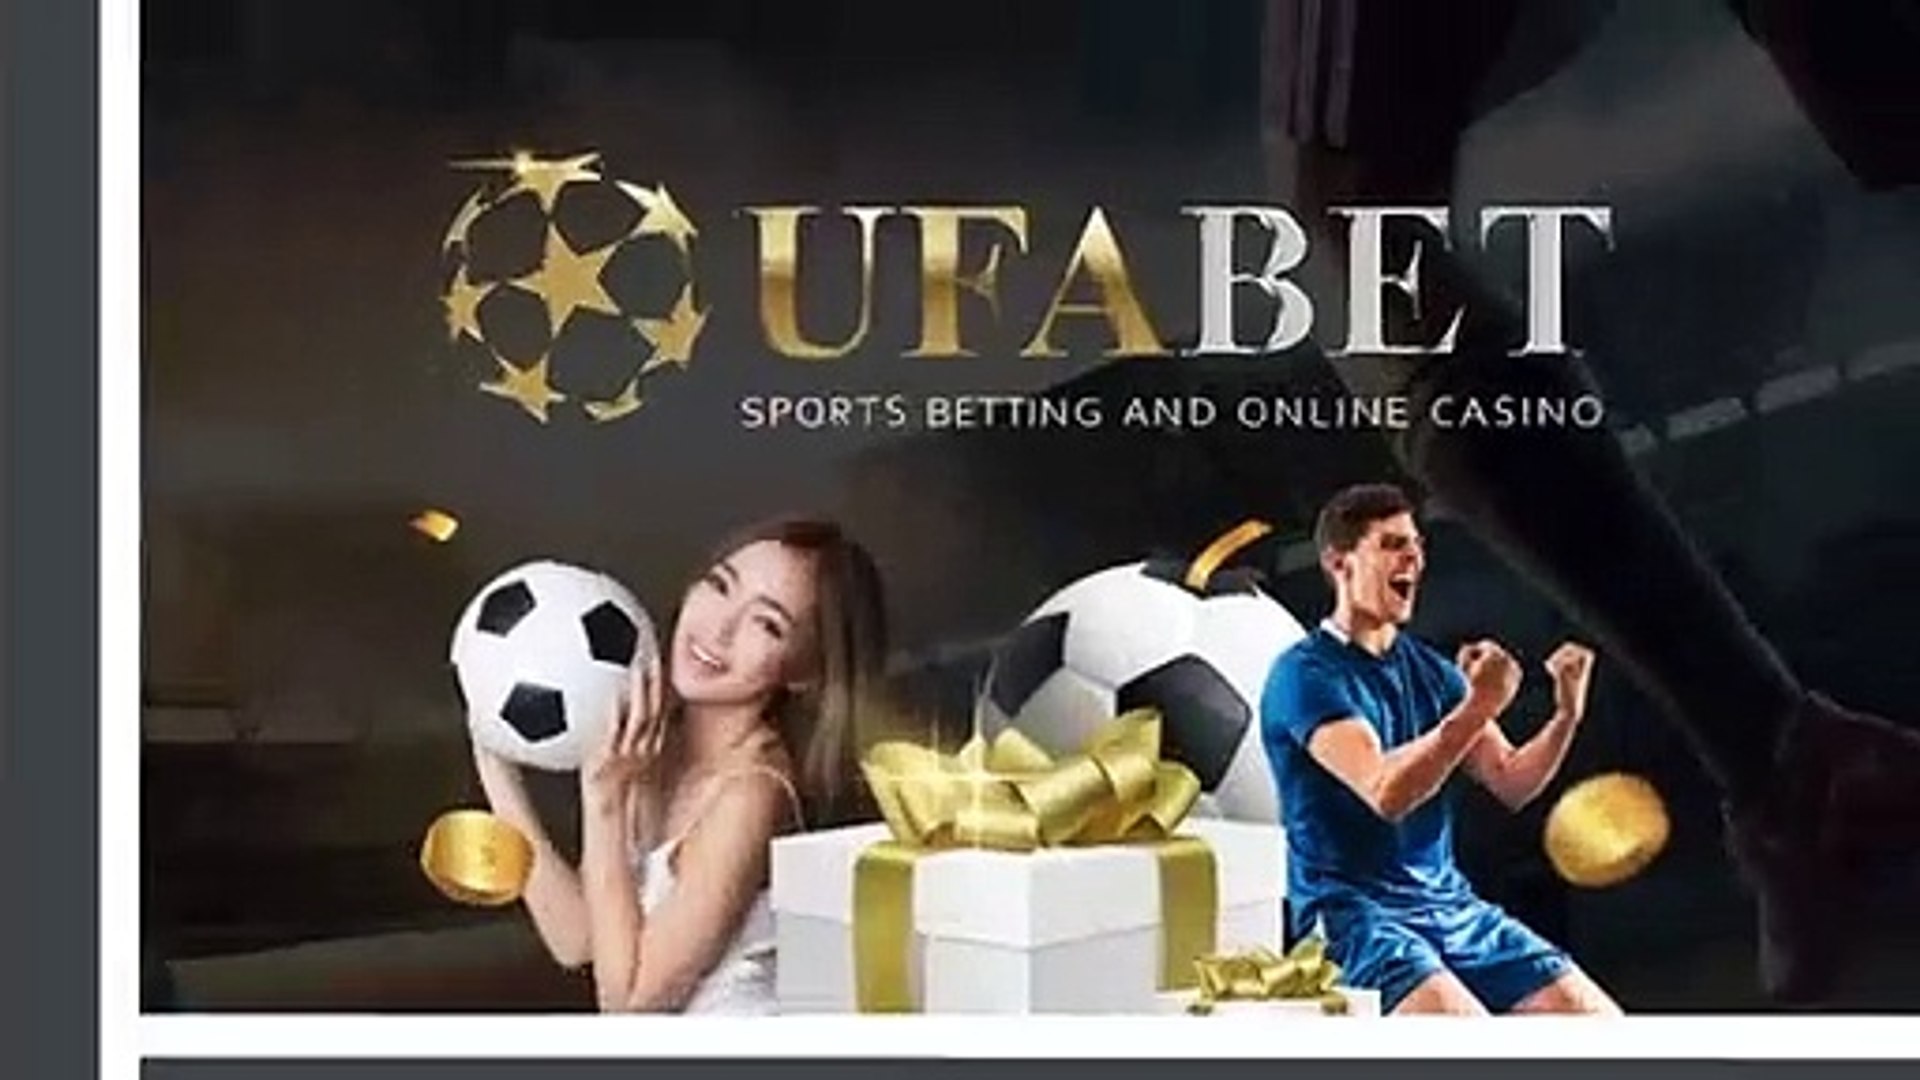 Why Should One Rely On The Huge Reward System Of Ufabet?